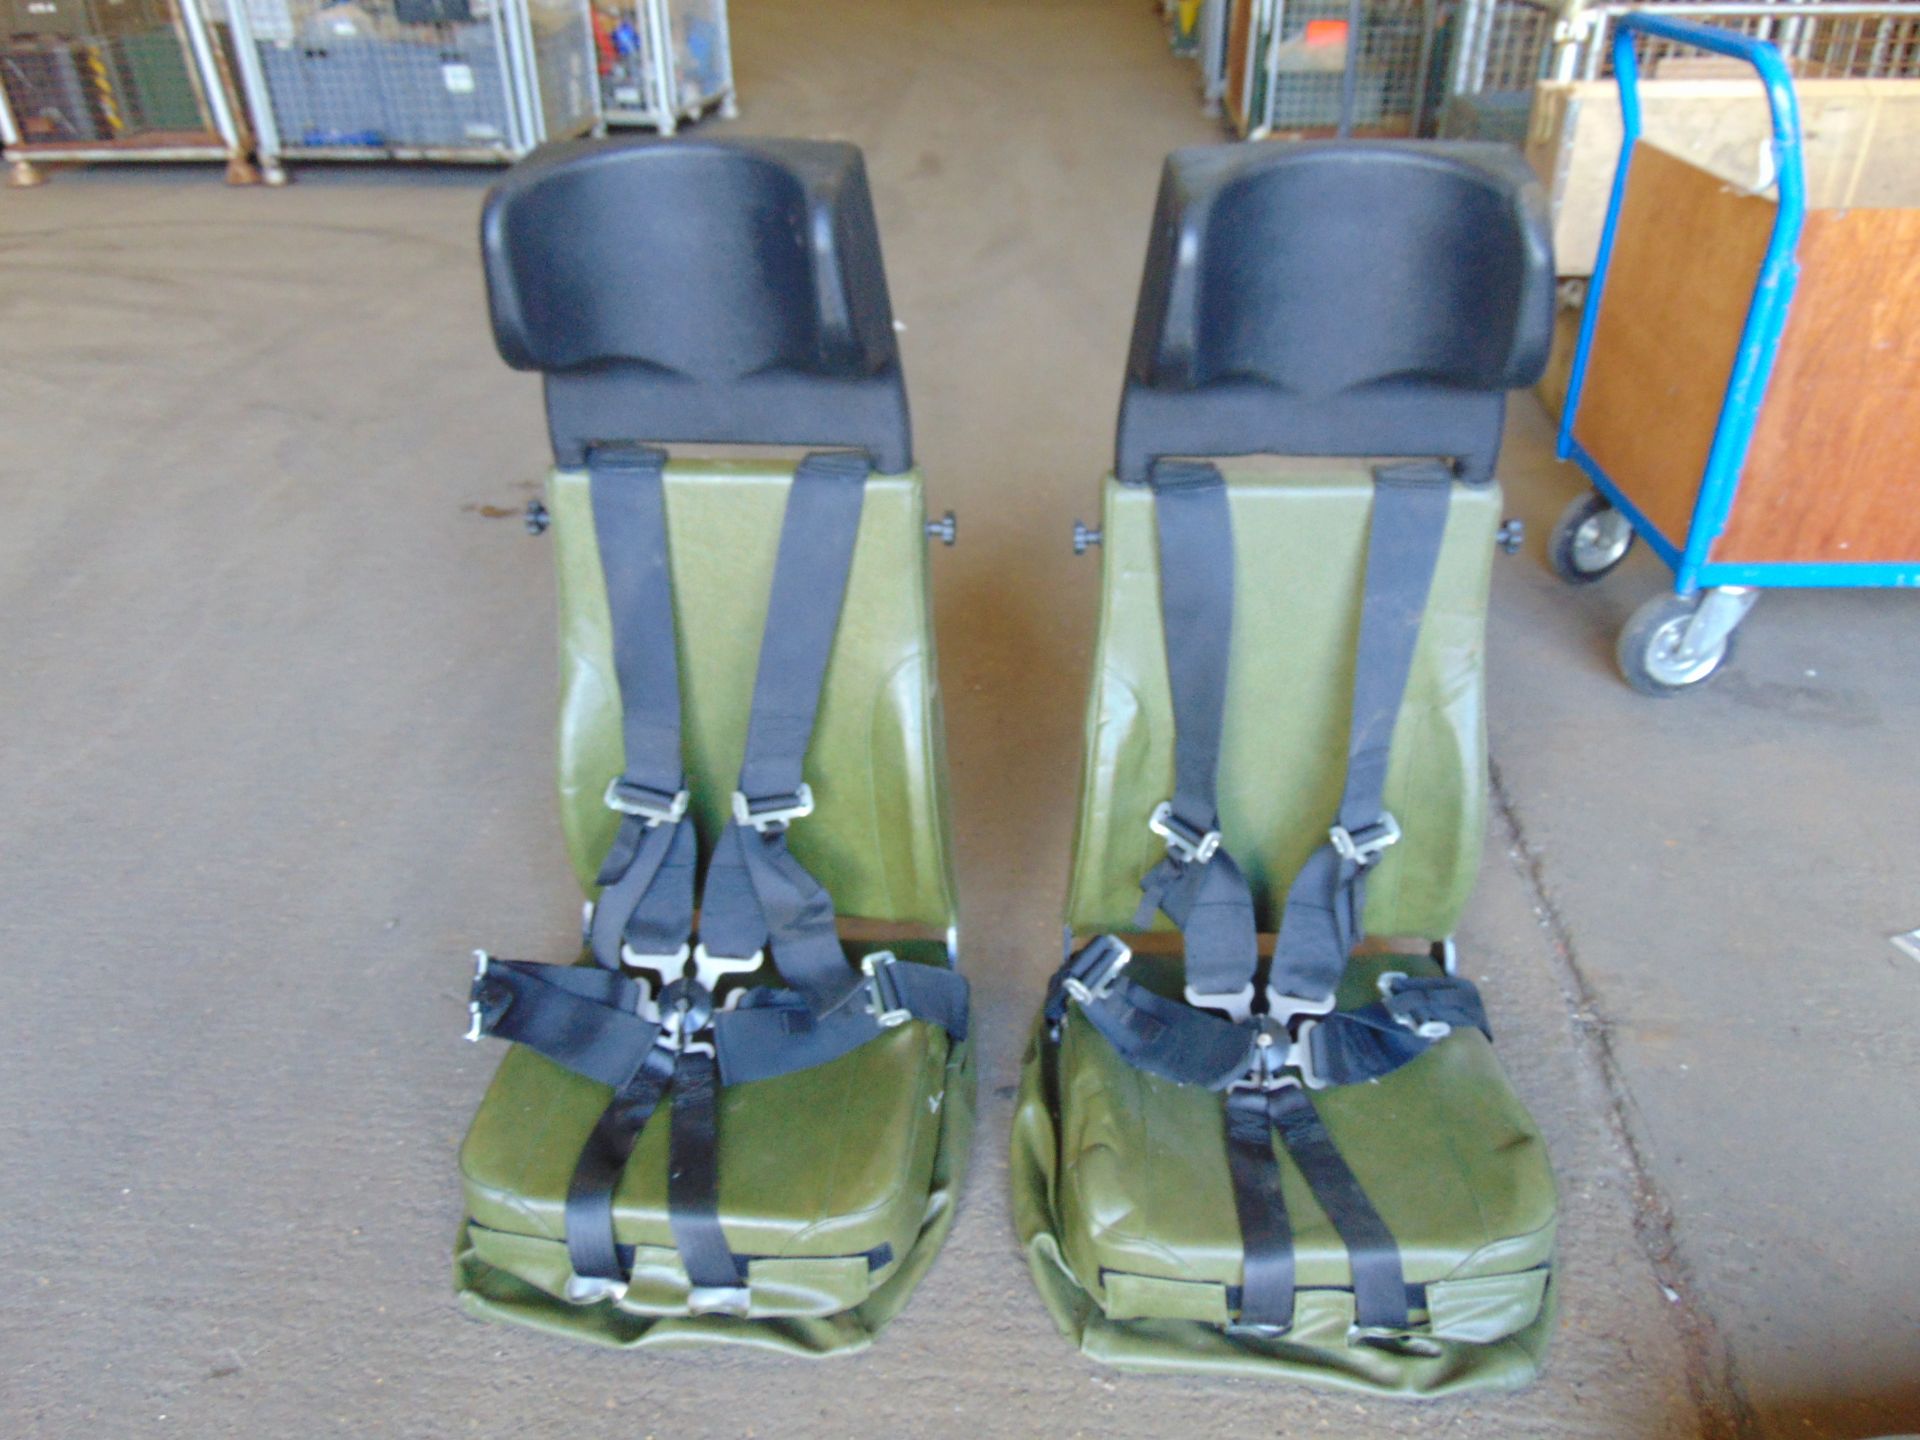 2 x New Unissued WIMIK Crew Seats c/w 5 Point Harness - Image 6 of 9